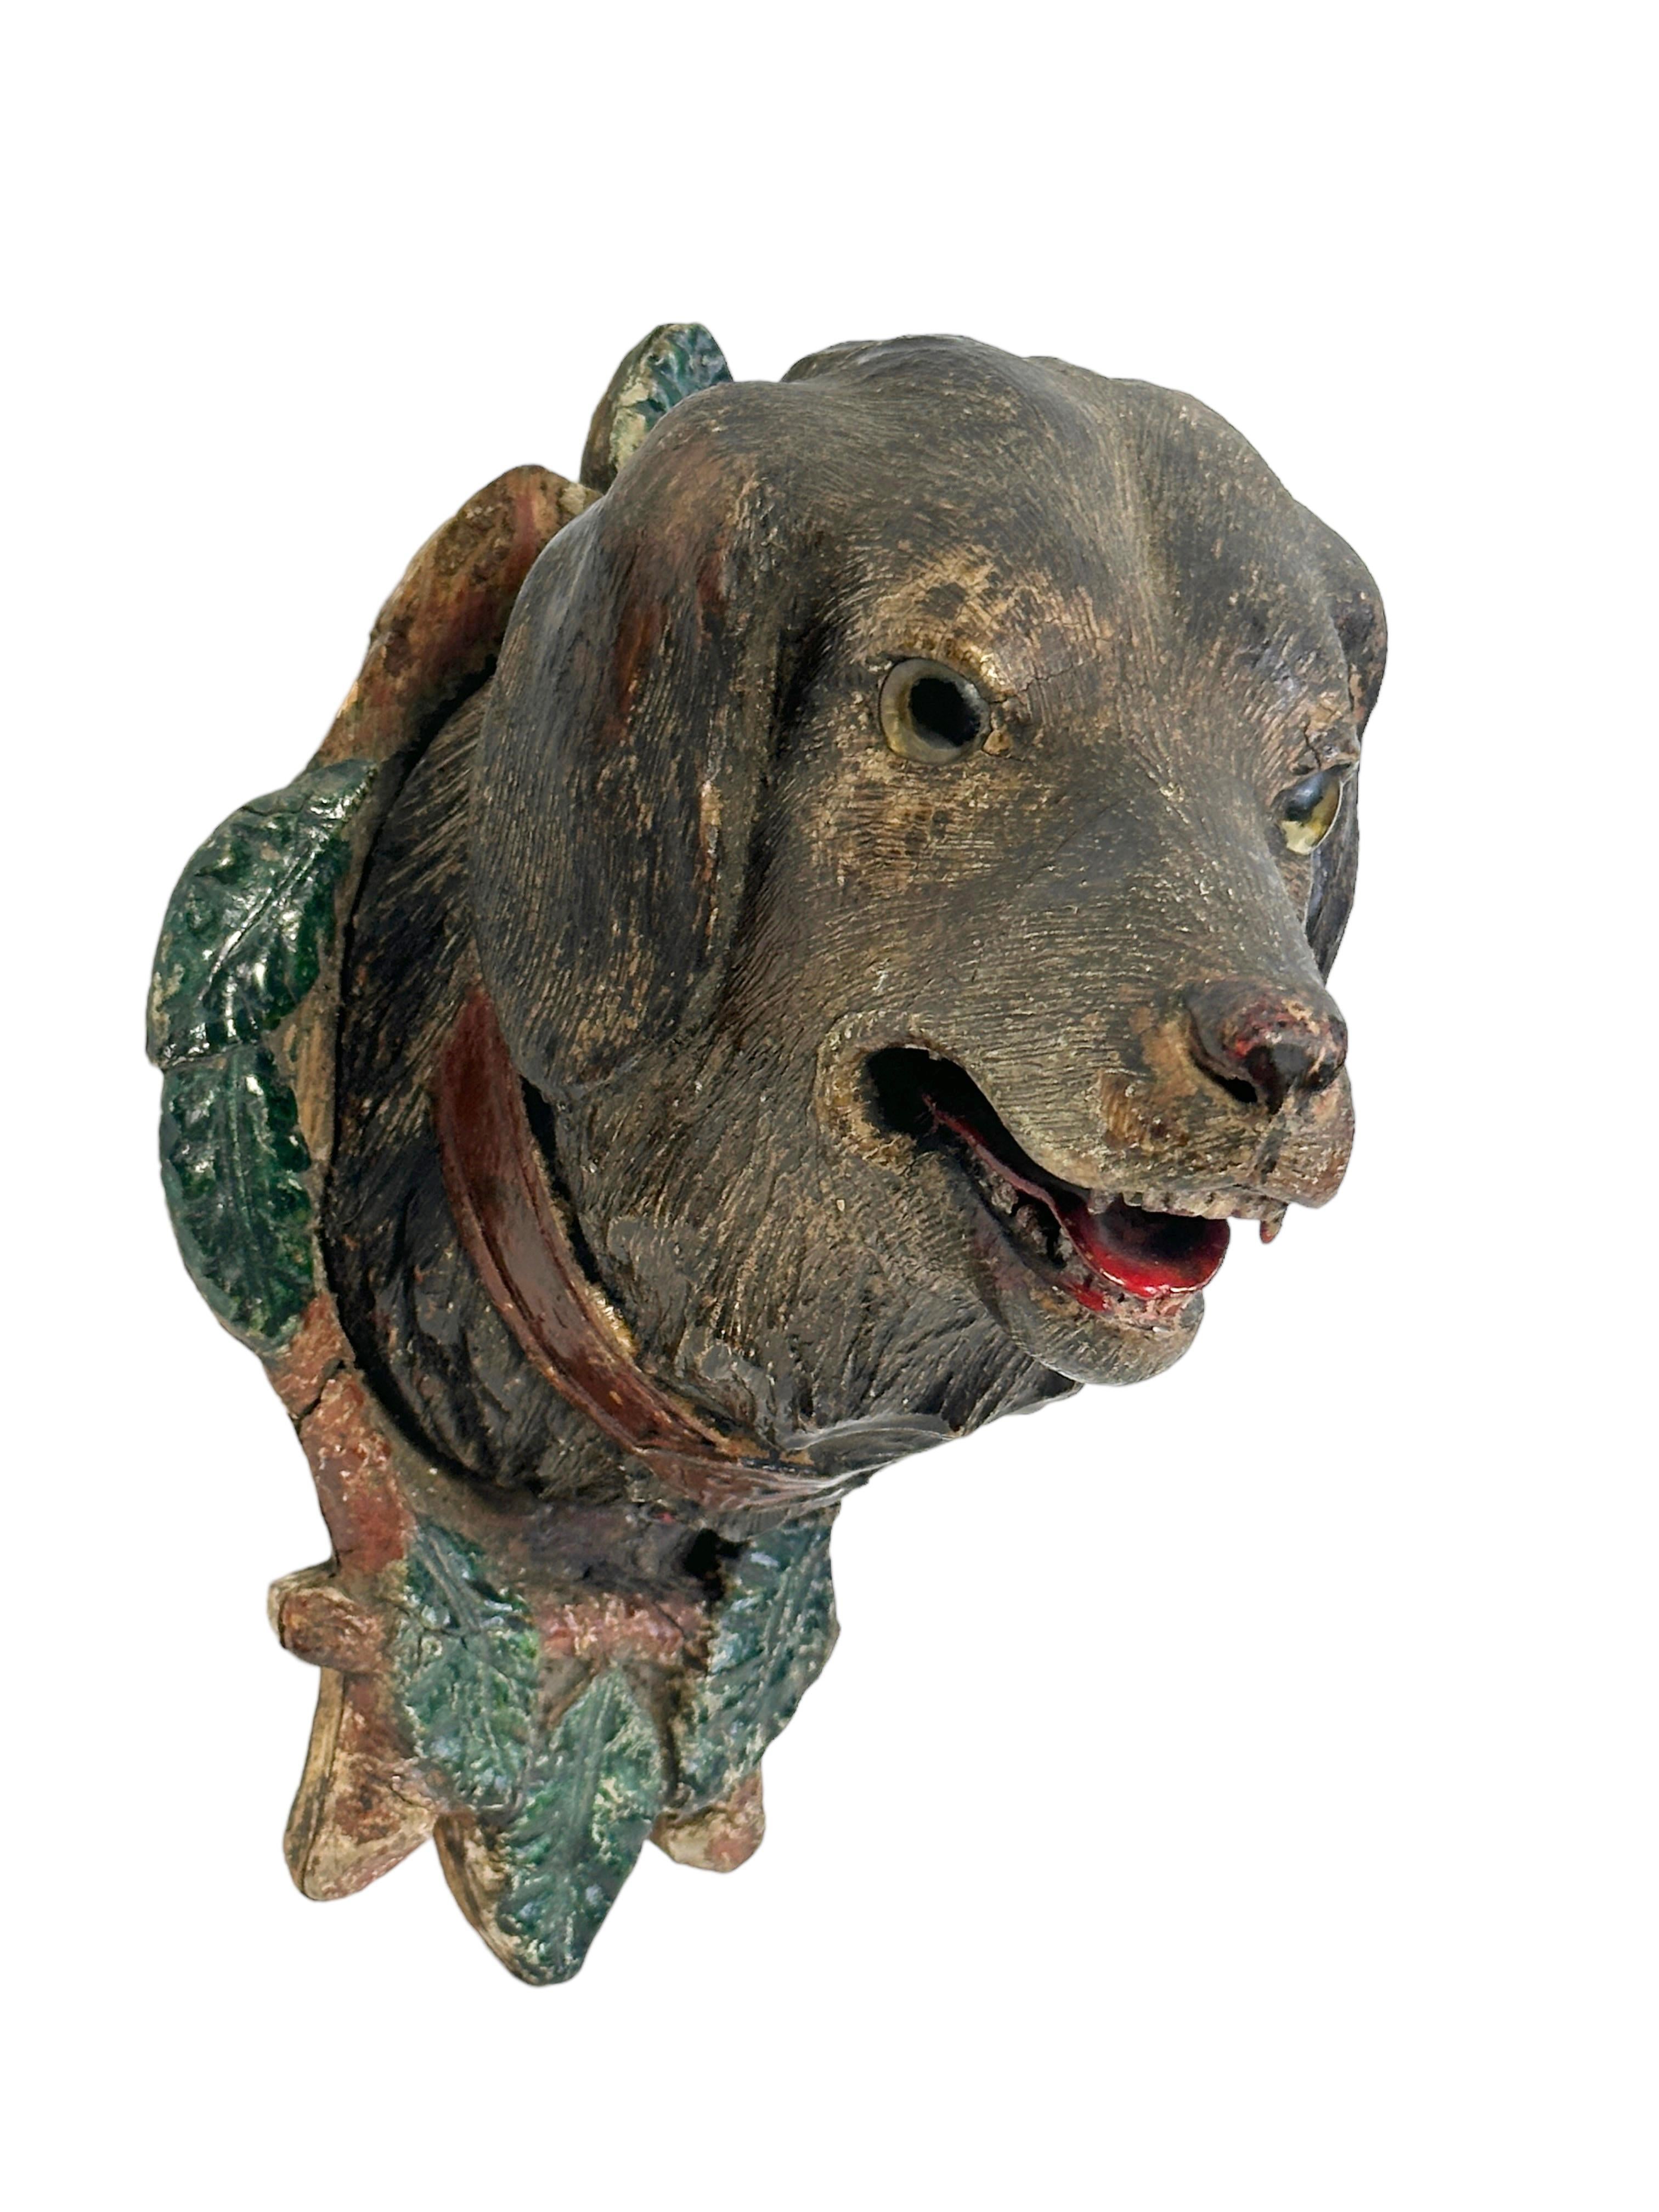 A great looking hand carved original wooden Folk Art Dog head with glass eyes, wall decoration. A great piece for a suitable ambiance in a trophy room or the office of a Hunter or Woodsman. More than likely one of the Folk Art items made between